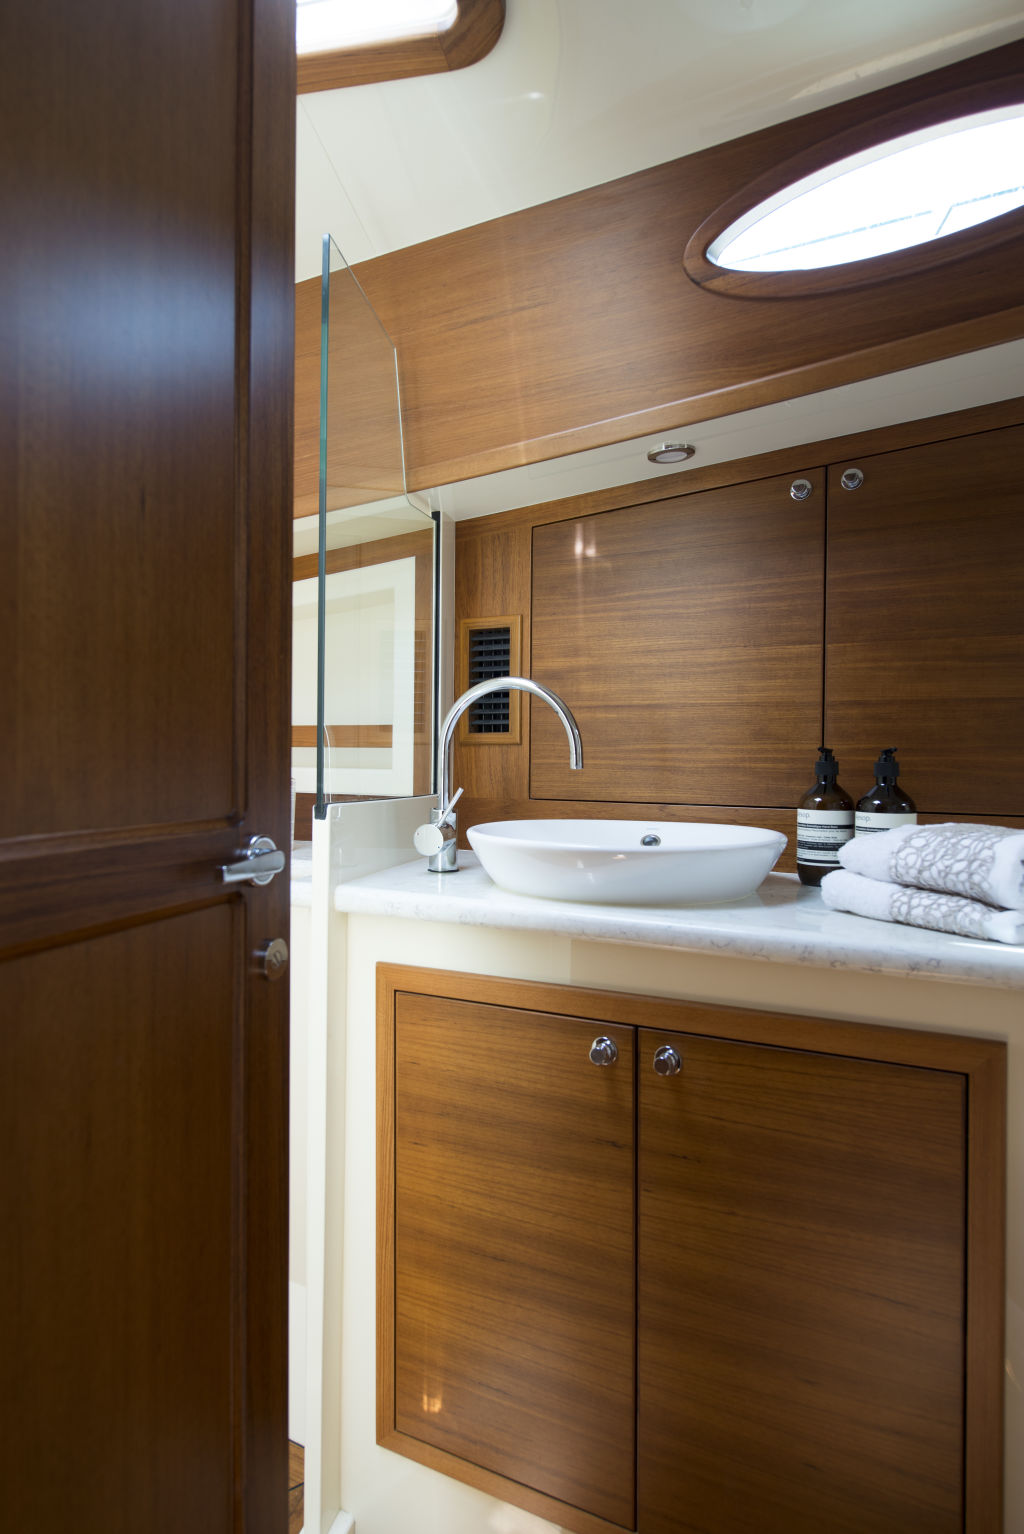 You could easily mistake the bathroom for a stylish ensuite in a high-end residence. Photo: Supplied